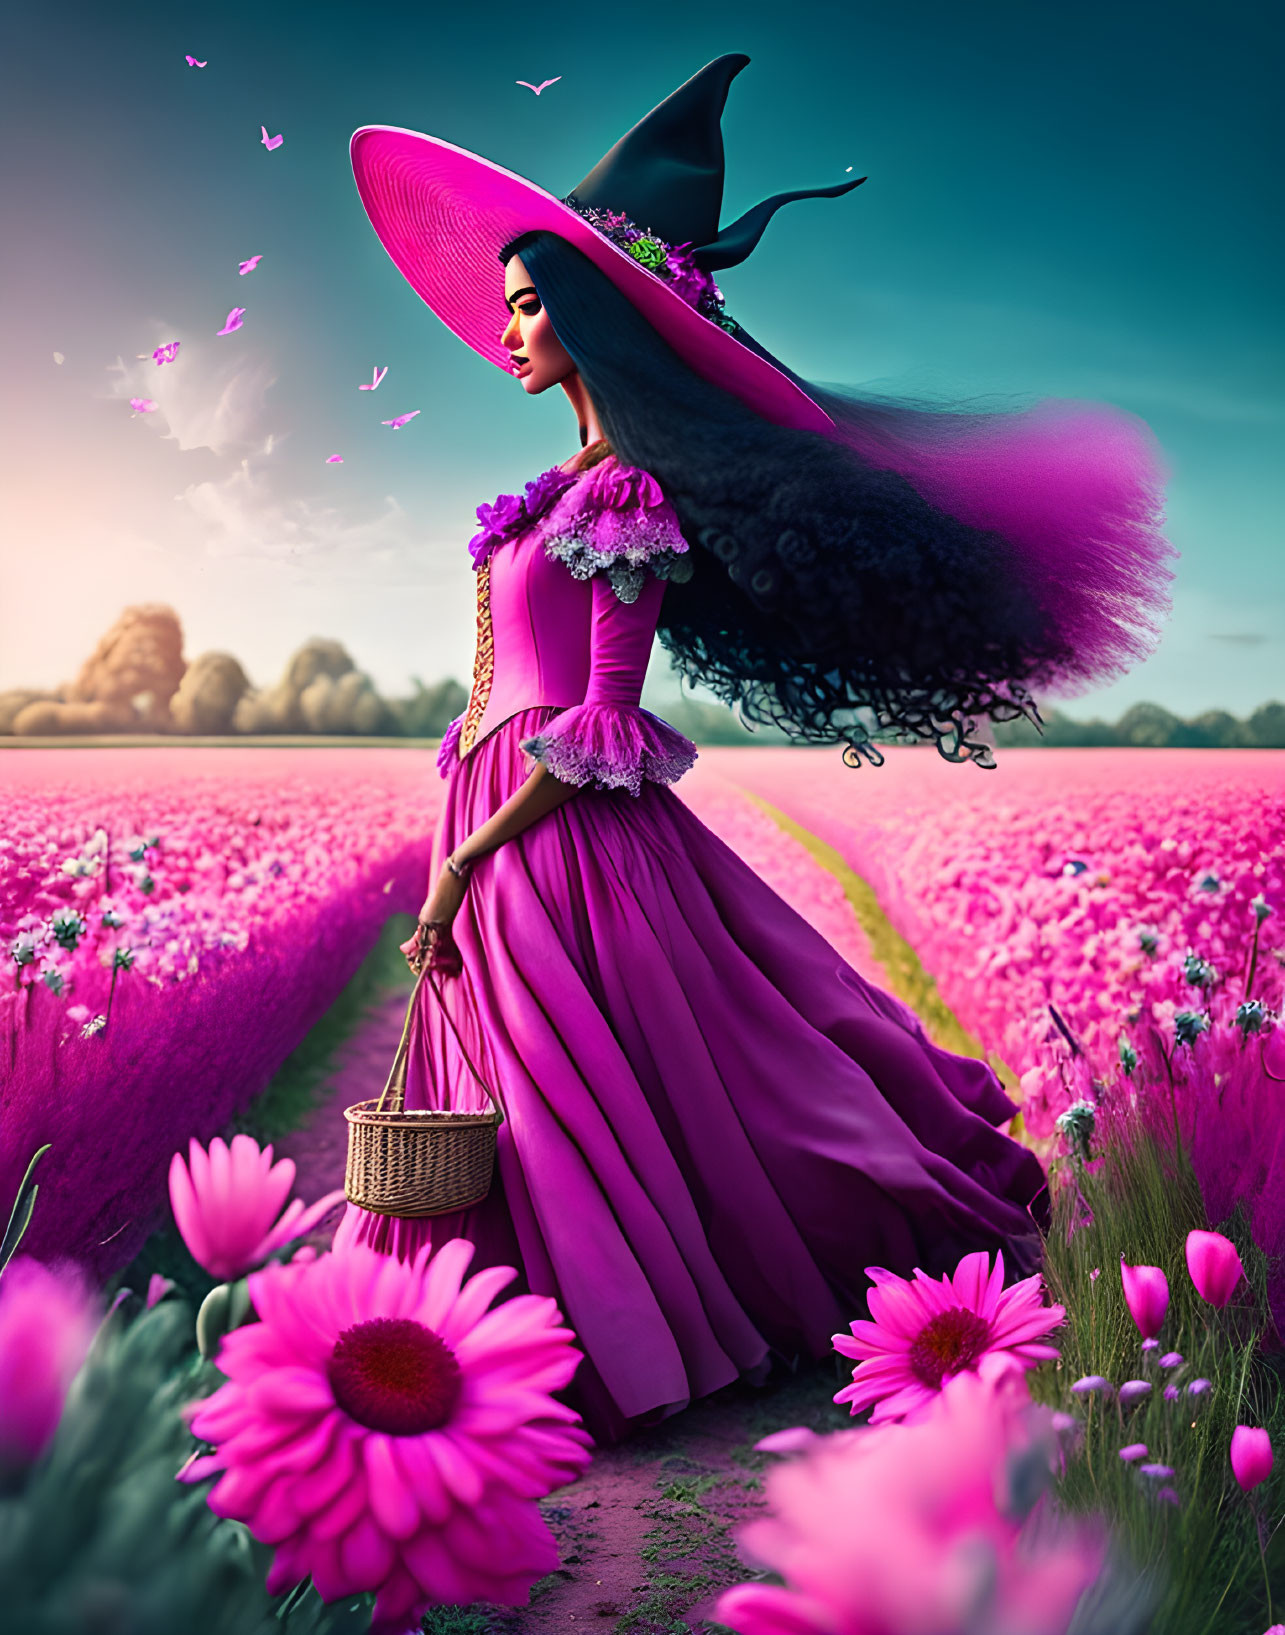 Woman in Purple Dress and Hat Surrounded by Pink Flowers and Birds